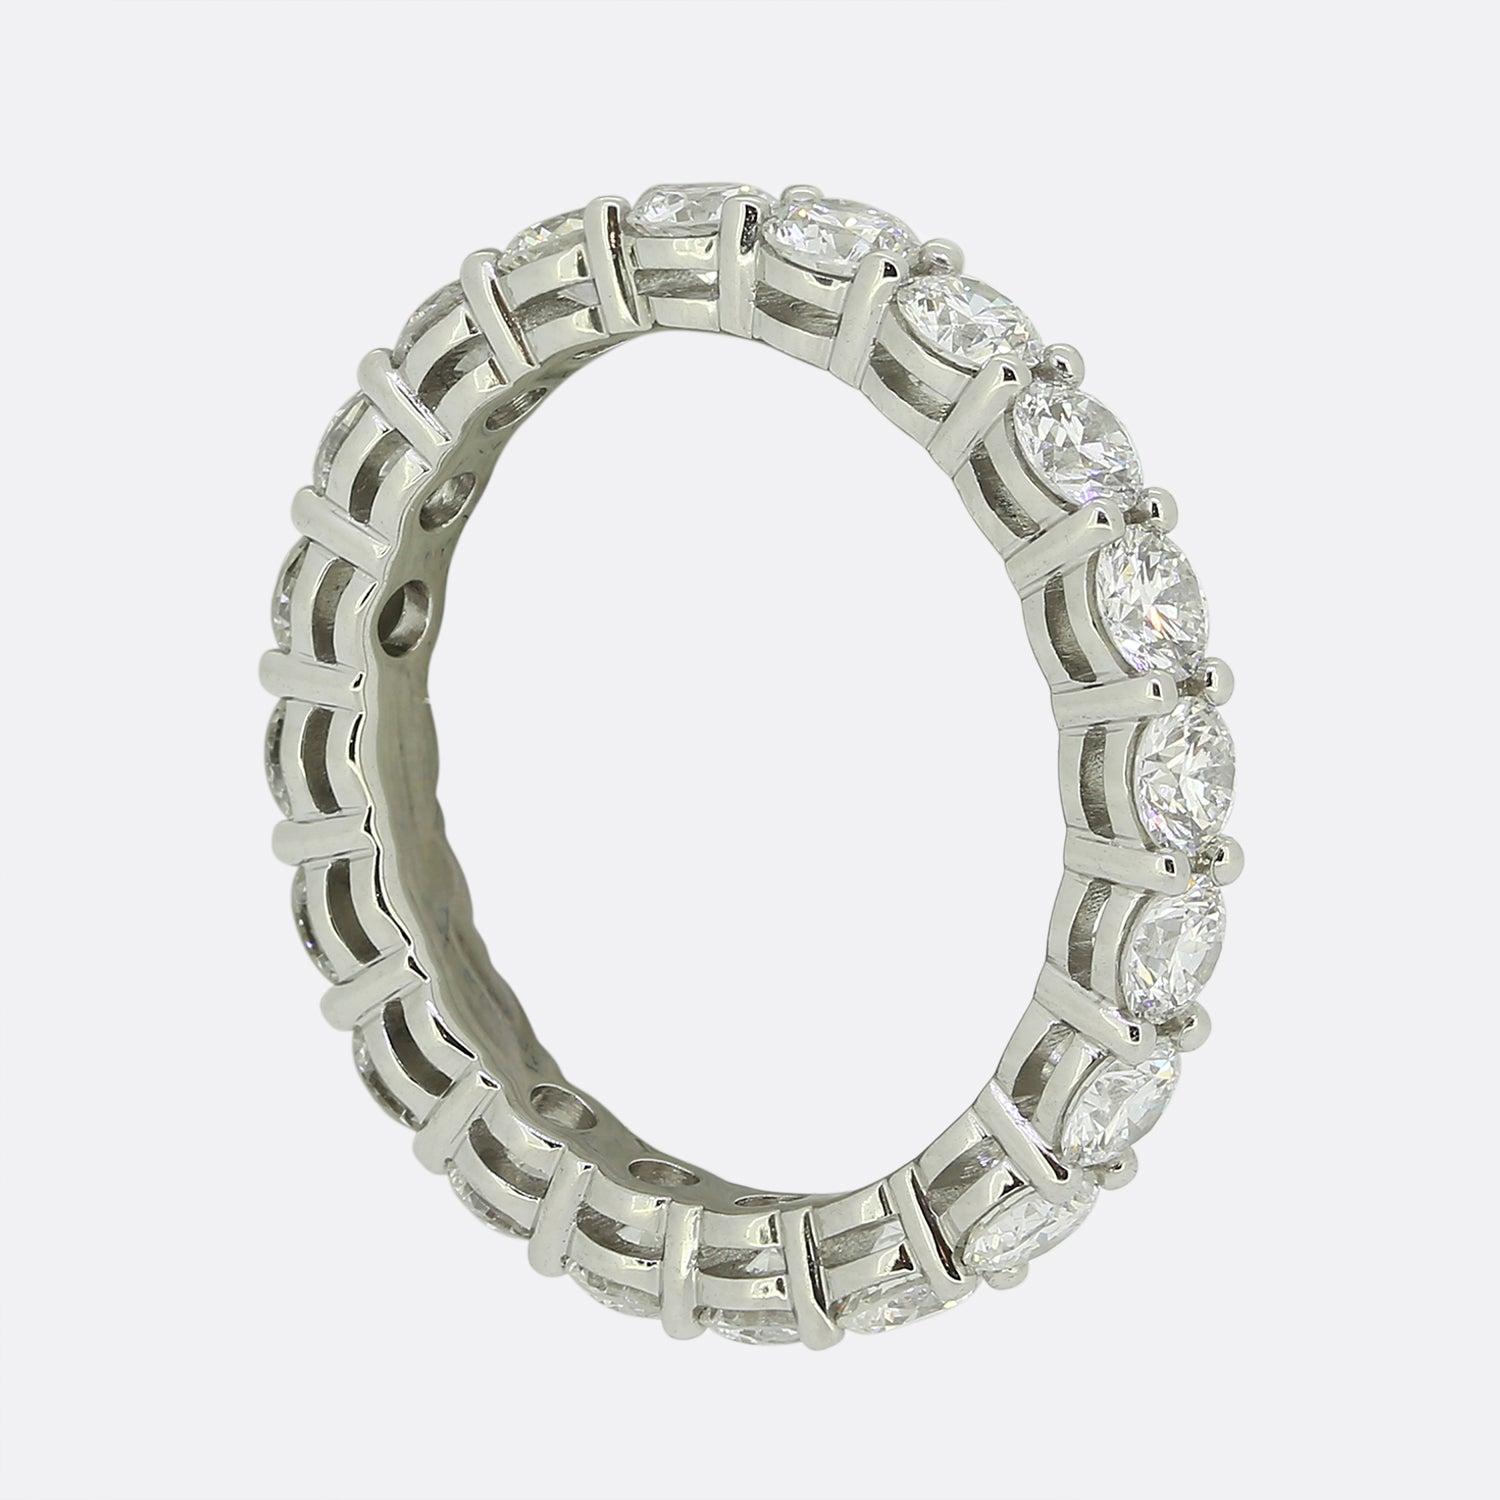 Here we have a platinum full eternity ring from Tiffany & Co. This piece forms part of the 'Embrace' collection and showcases twenty claw set, high quality round brilliant cut diamonds around the entirety of the band. 

Condition: Used